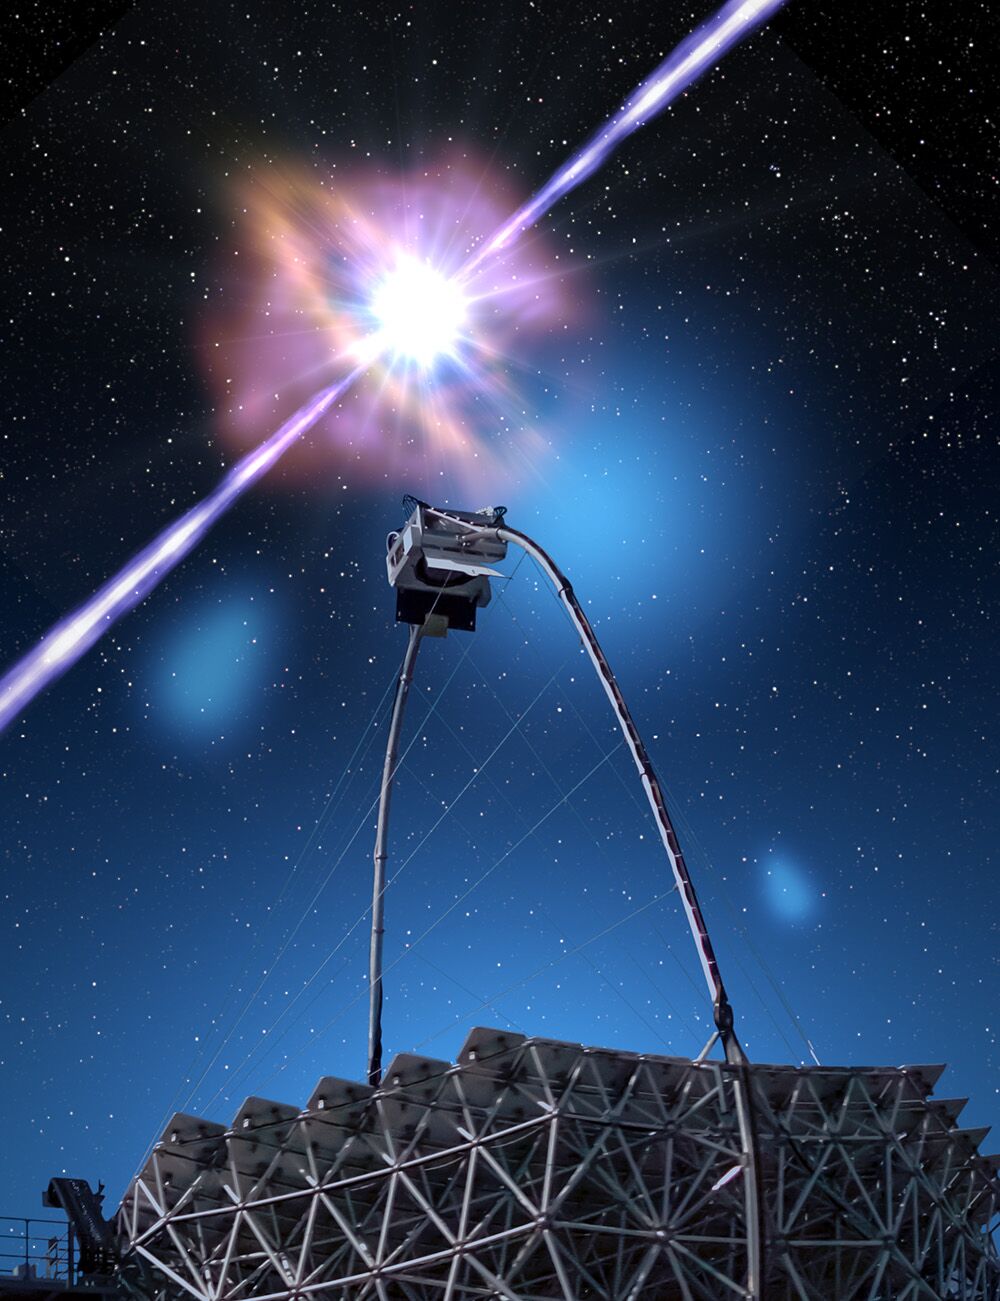 Artist's impression showing one of the MAGIC telescopes picking up the signal from a gamma-ray burst. 